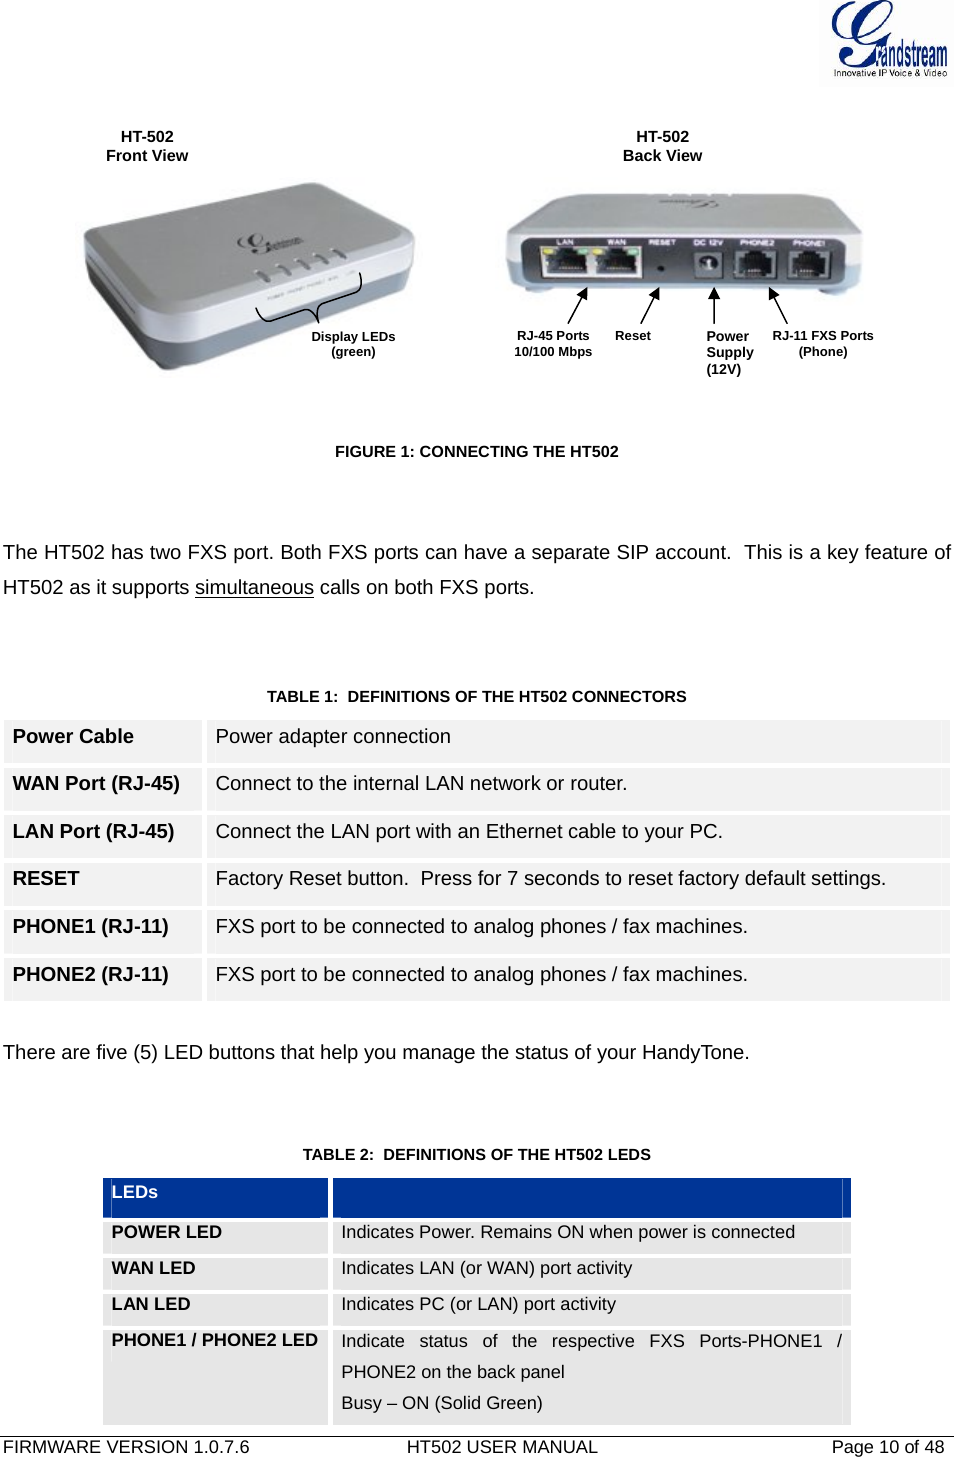  FIRMWARE VERSION 1.0.7.6                               HT502 USER MANUAL                                              Page 10 of 48     FIGURE 1: CONNECTING THE HT502   The HT502 has two FXS port. Both FXS ports can have a separate SIP account.  This is a key feature of HT502 as it supports simultaneous calls on both FXS ports.    TABLE 1:  DEFINITIONS OF THE HT502 CONNECTORS Power Cable  Power adapter connection WAN Port (RJ-45)  Connect to the internal LAN network or router. LAN Port (RJ-45)  Connect the LAN port with an Ethernet cable to your PC. RESET  Factory Reset button.  Press for 7 seconds to reset factory default settings. PHONE1 (RJ-11)  FXS port to be connected to analog phones / fax machines. PHONE2 (RJ-11)  FXS port to be connected to analog phones / fax machines.  There are five (5) LED buttons that help you manage the status of your HandyTone.   TABLE 2:  DEFINITIONS OF THE HT502 LEDS LEDs    POWER LED  Indicates Power. Remains ON when power is connected WAN LED  Indicates LAN (or WAN) port activity LAN LED   Indicates PC (or LAN) port activity PHONE1 / PHONE2 LED  Indicate status of the respective FXS Ports-PHONE1 / PHONE2 on the back panel Busy – ON (Solid Green) HT-502Back View RJ-45 Ports 10/100 Mbps  Reset  RJ-11 FXS Ports (Phone) Power Supply  (12V) HT-502 Front View Display LEDs (green) 